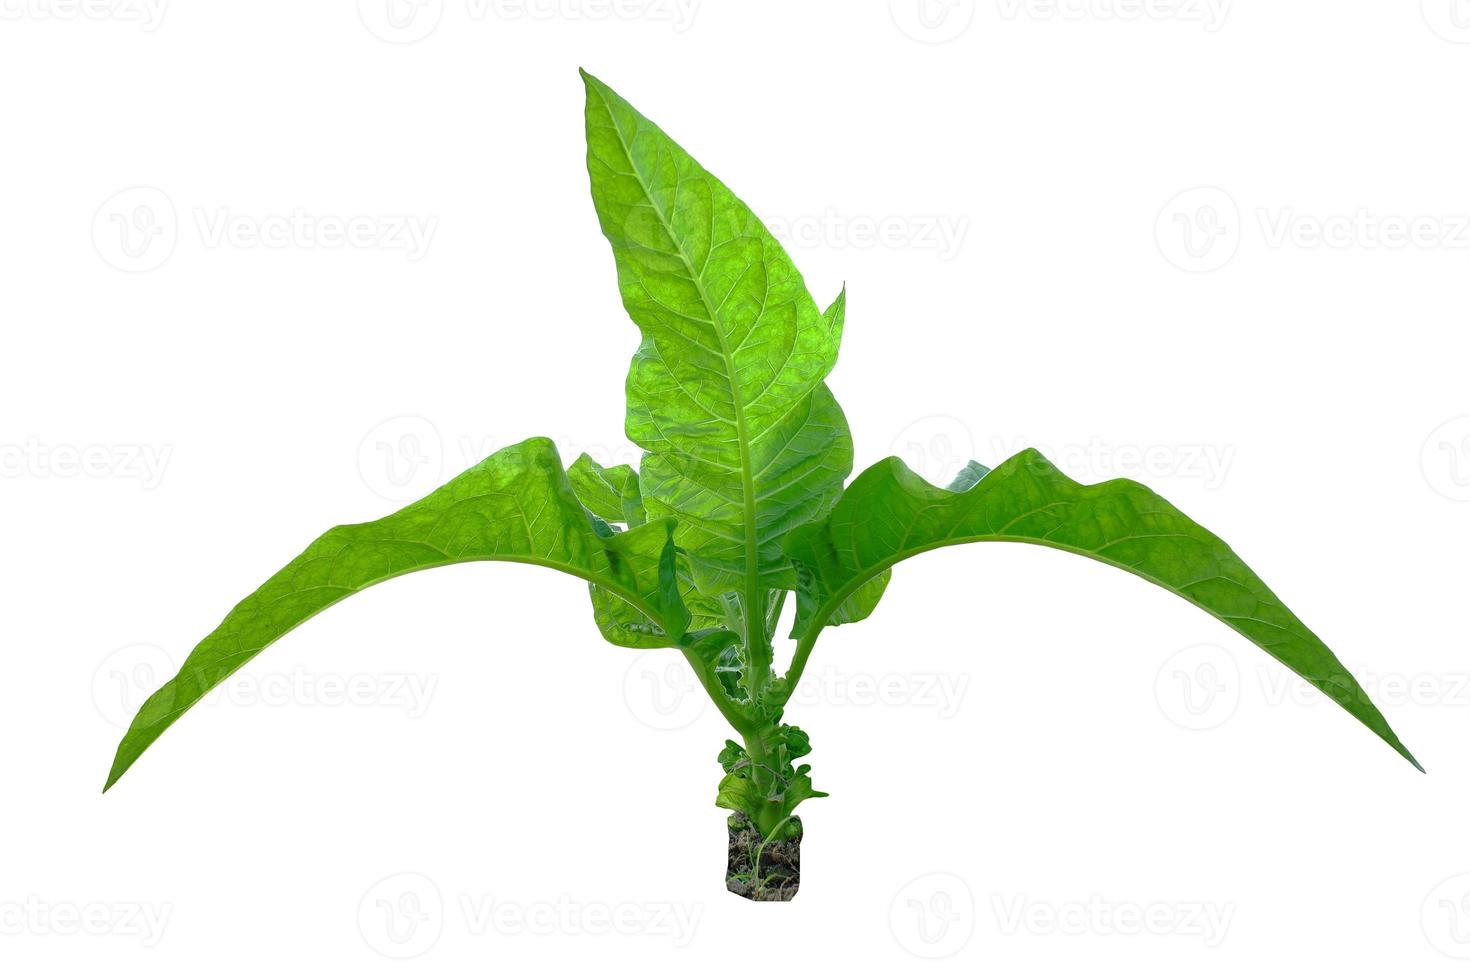 Brazilan Tobacco Leaves On White Background. Nicotiana Rustica, or Aztec tobacco, Strong Tobacco, is a Rainforest Plant In The Family Solanaceae. photo